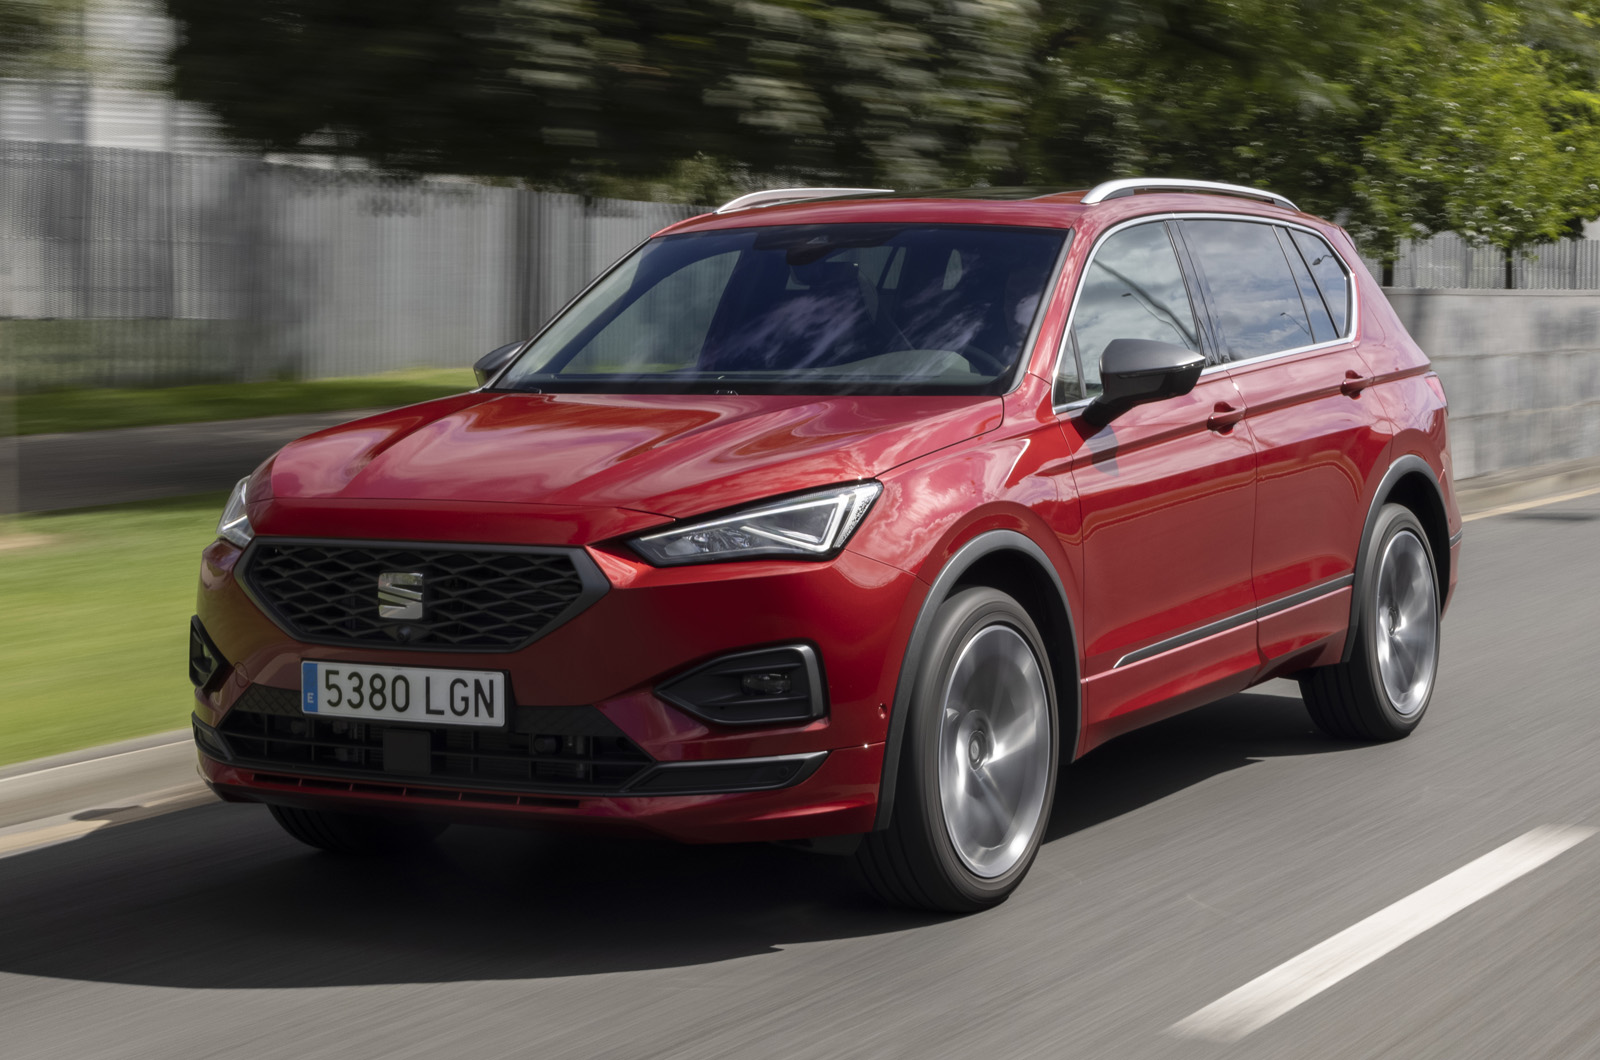 https://www.autocar.co.uk/sites/autocar.co.uk/files/images/car-reviews/first-drives/legacy/seat-boosts-its-large-suvs-performance-as-tarraco-2-0-tsi-245ps-dsg-4drive-enters-production_01_hq.jpg